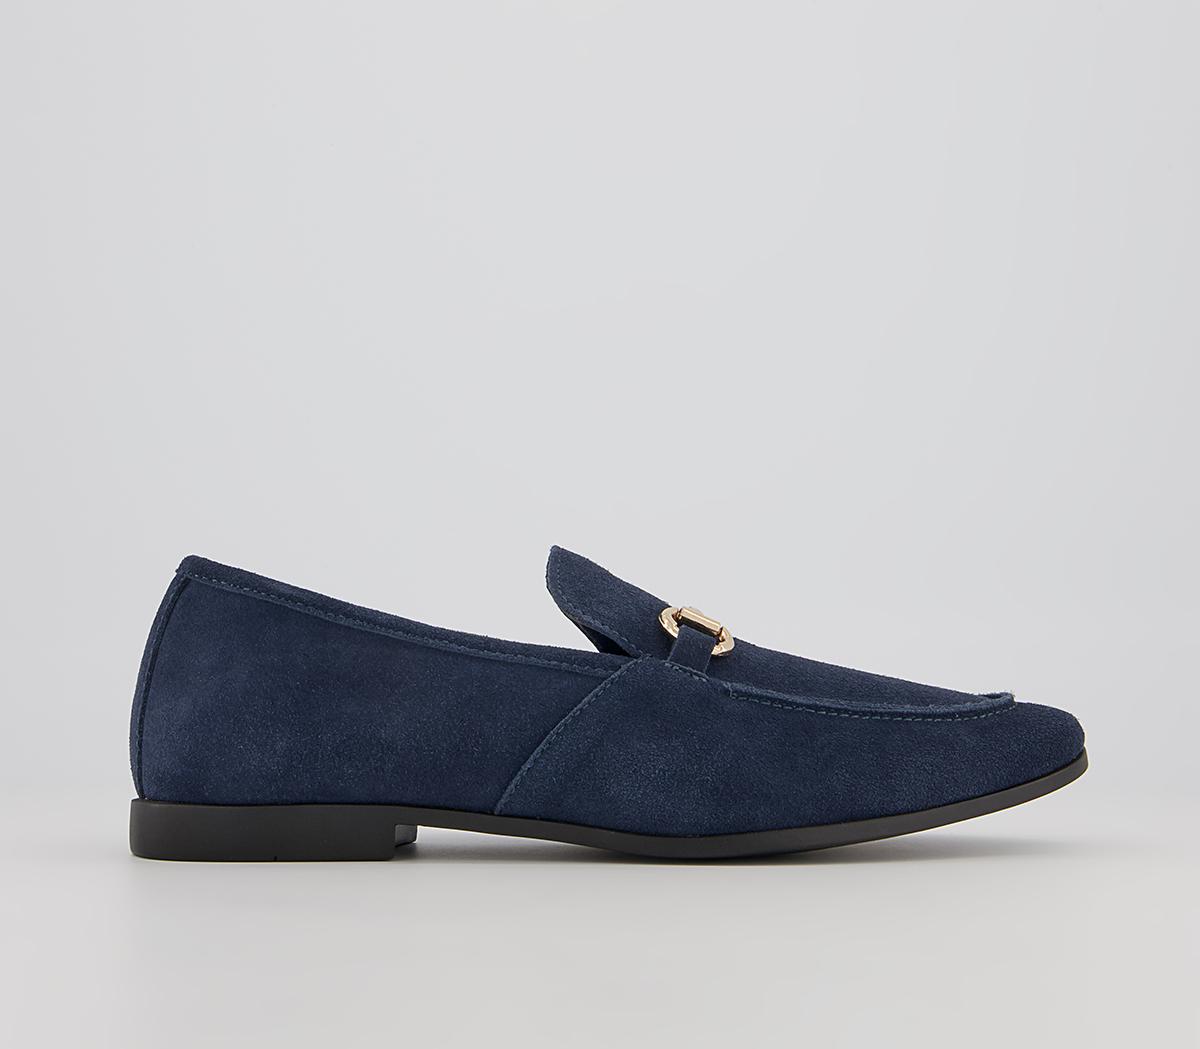 OfficeLemming 2 LoafersNavy Suede